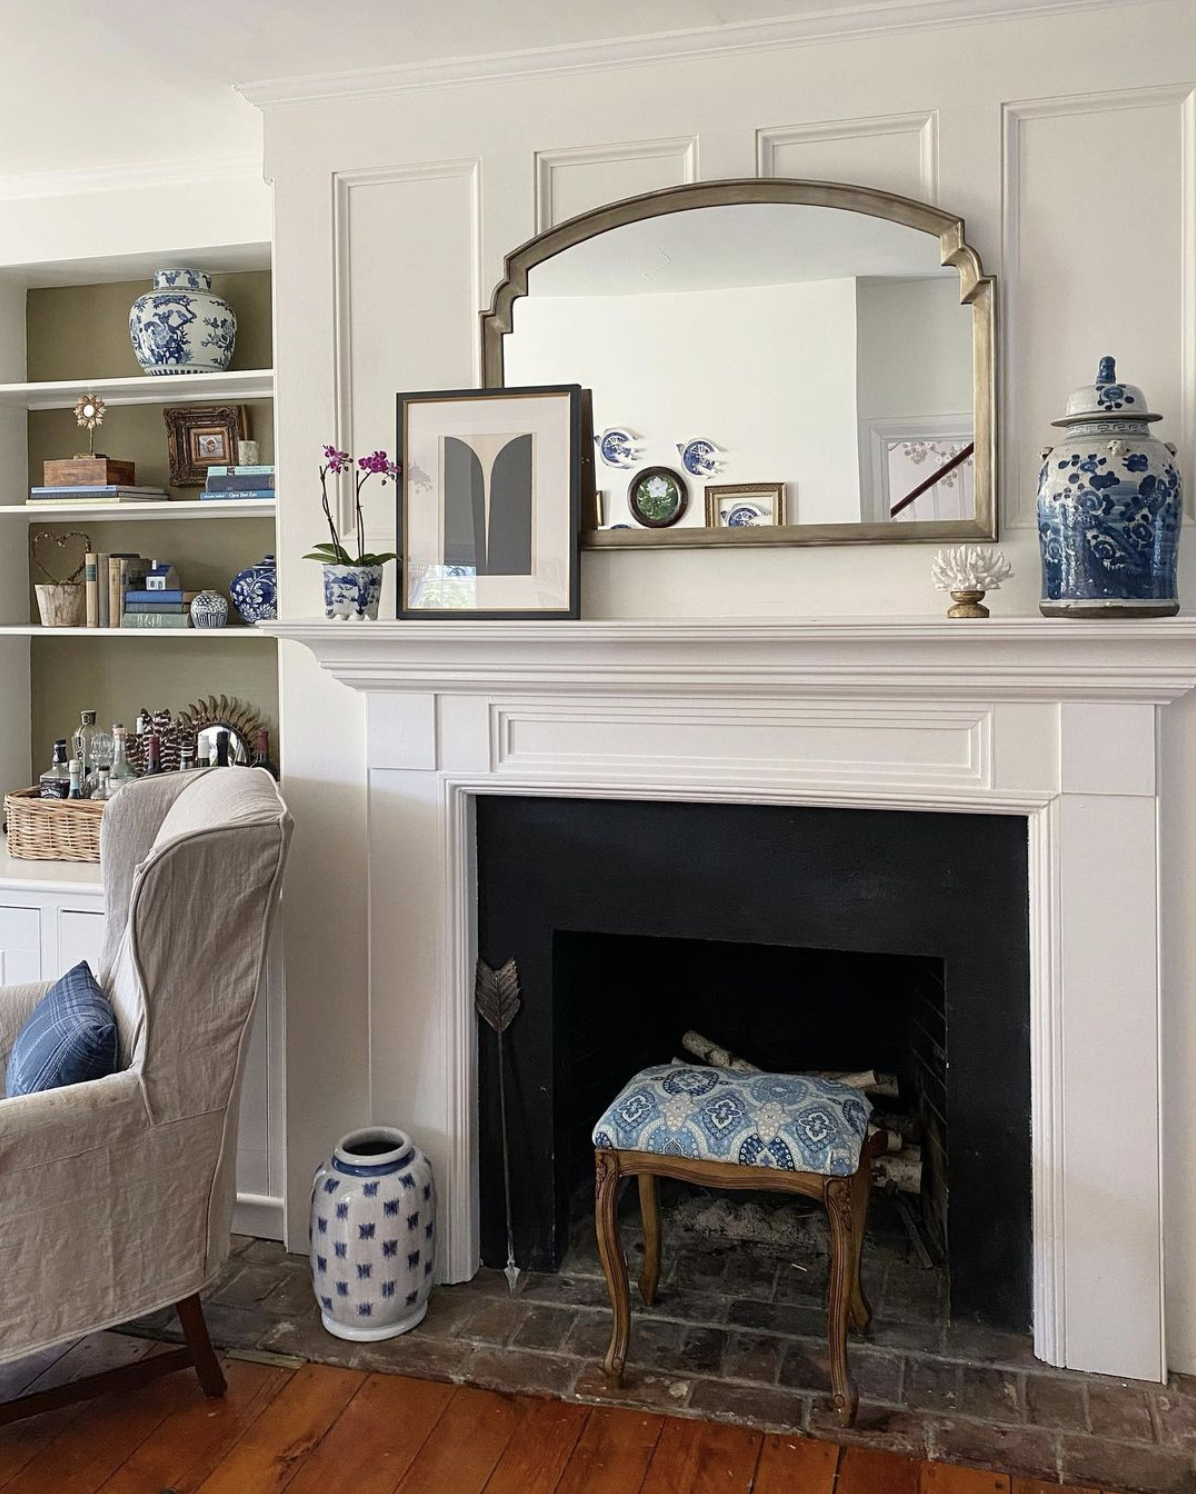 Antique home - love the mantel with mirror kellyelko.com